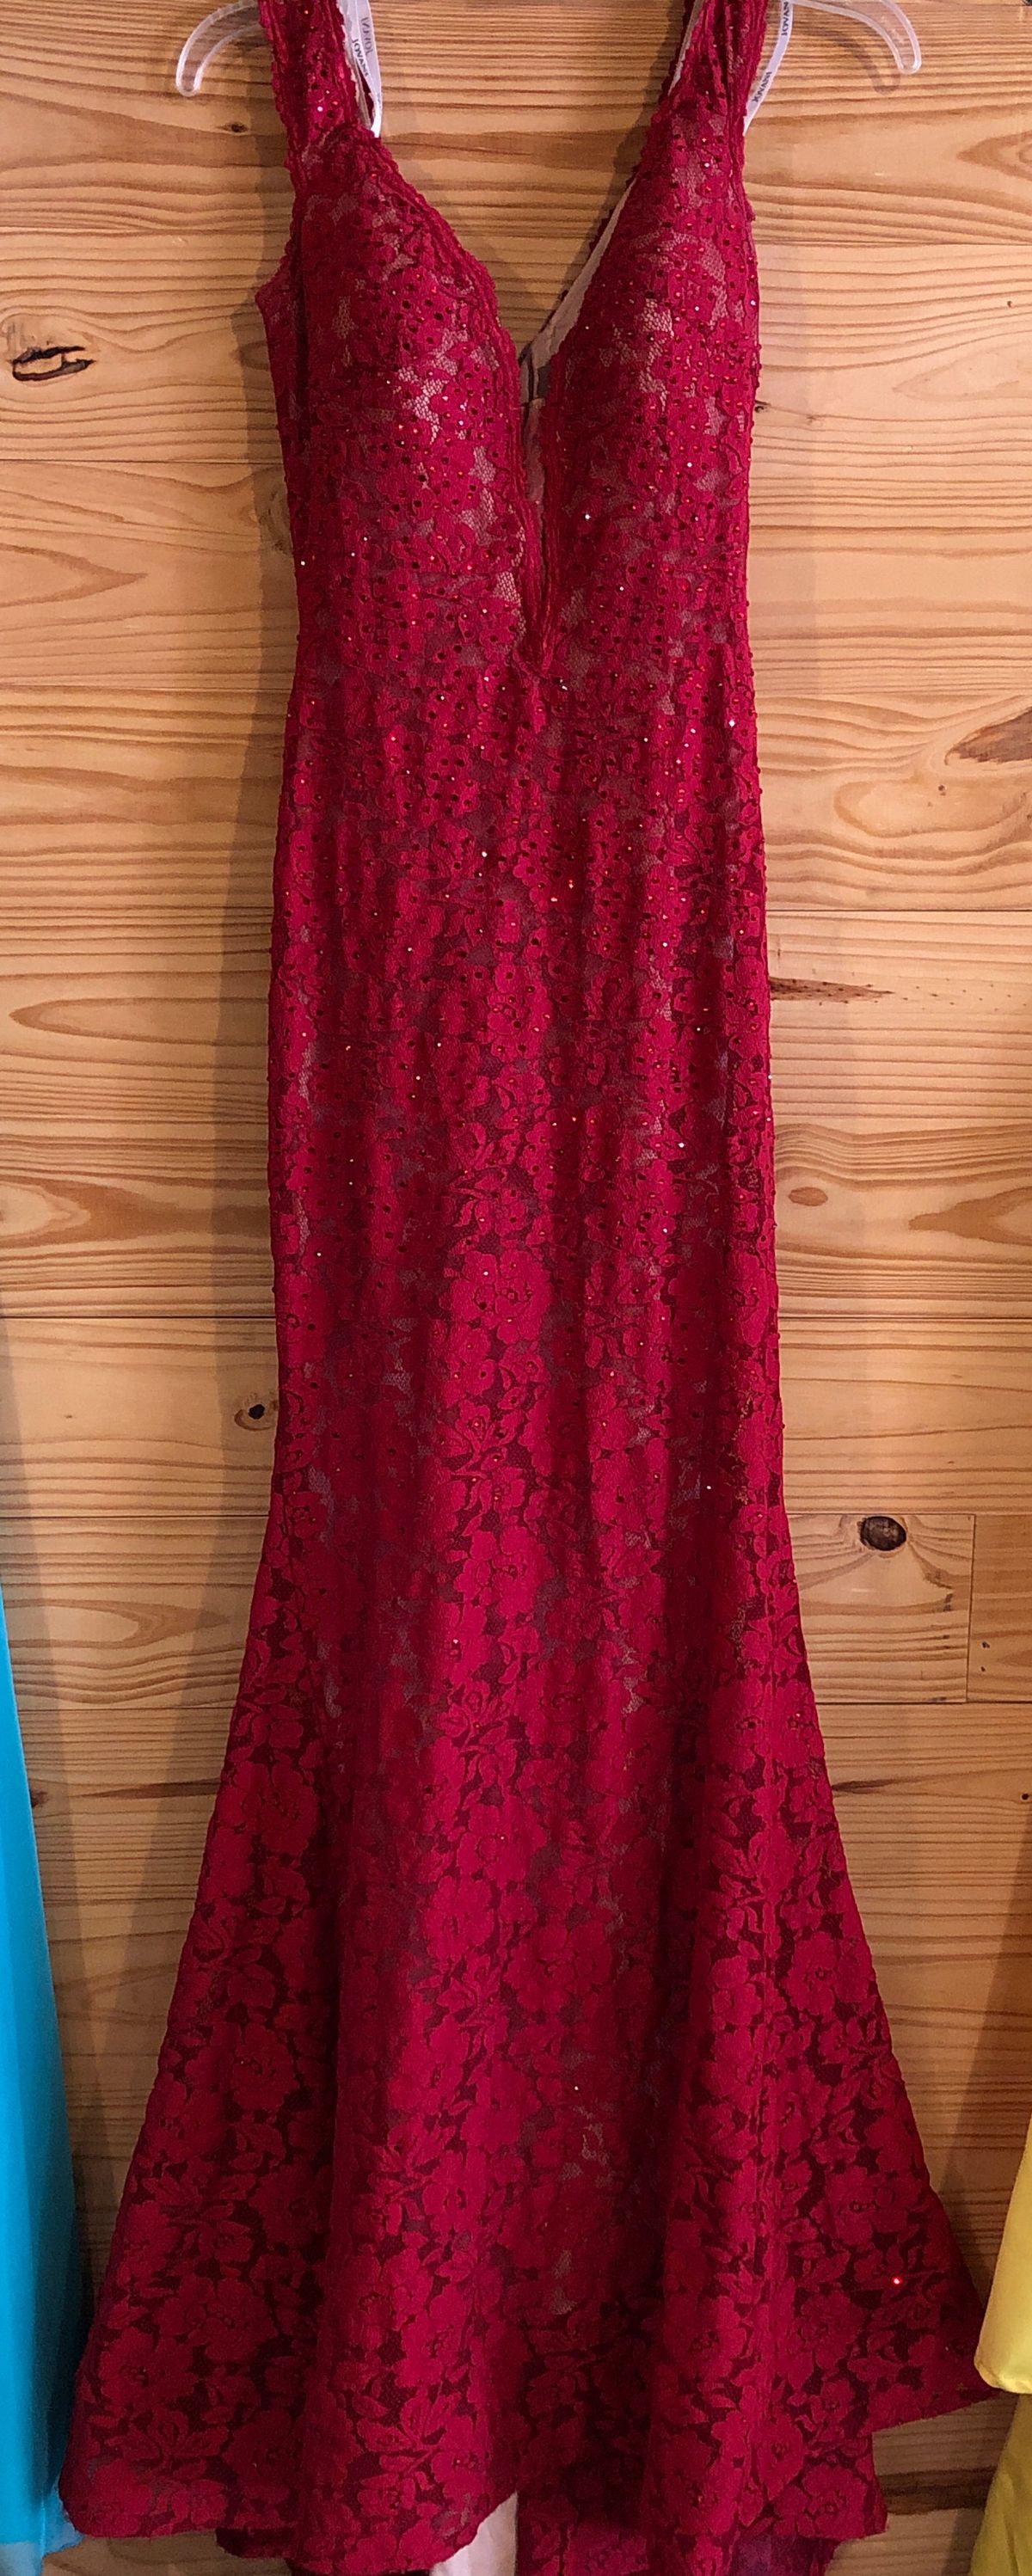 Jovani Size 4 Bridesmaid Cap Sleeve Lace Burgundy Red Mermaid Dress on Queenly